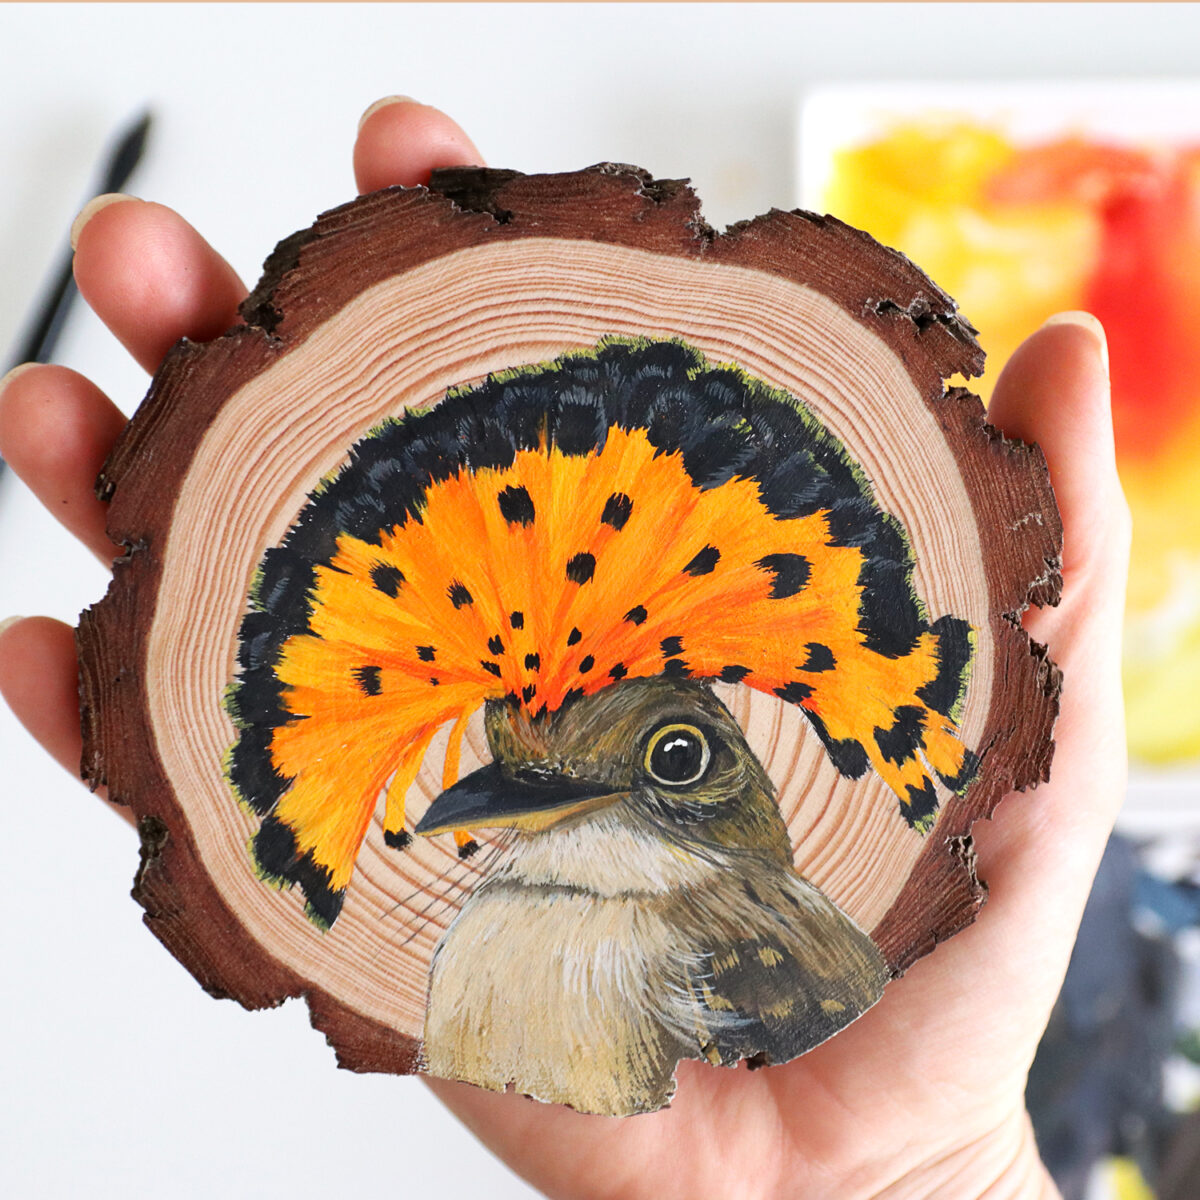 100 Days Of Birds A Marvelous Series Of Gouache On Wood Paintings By Deanna Maree (18)